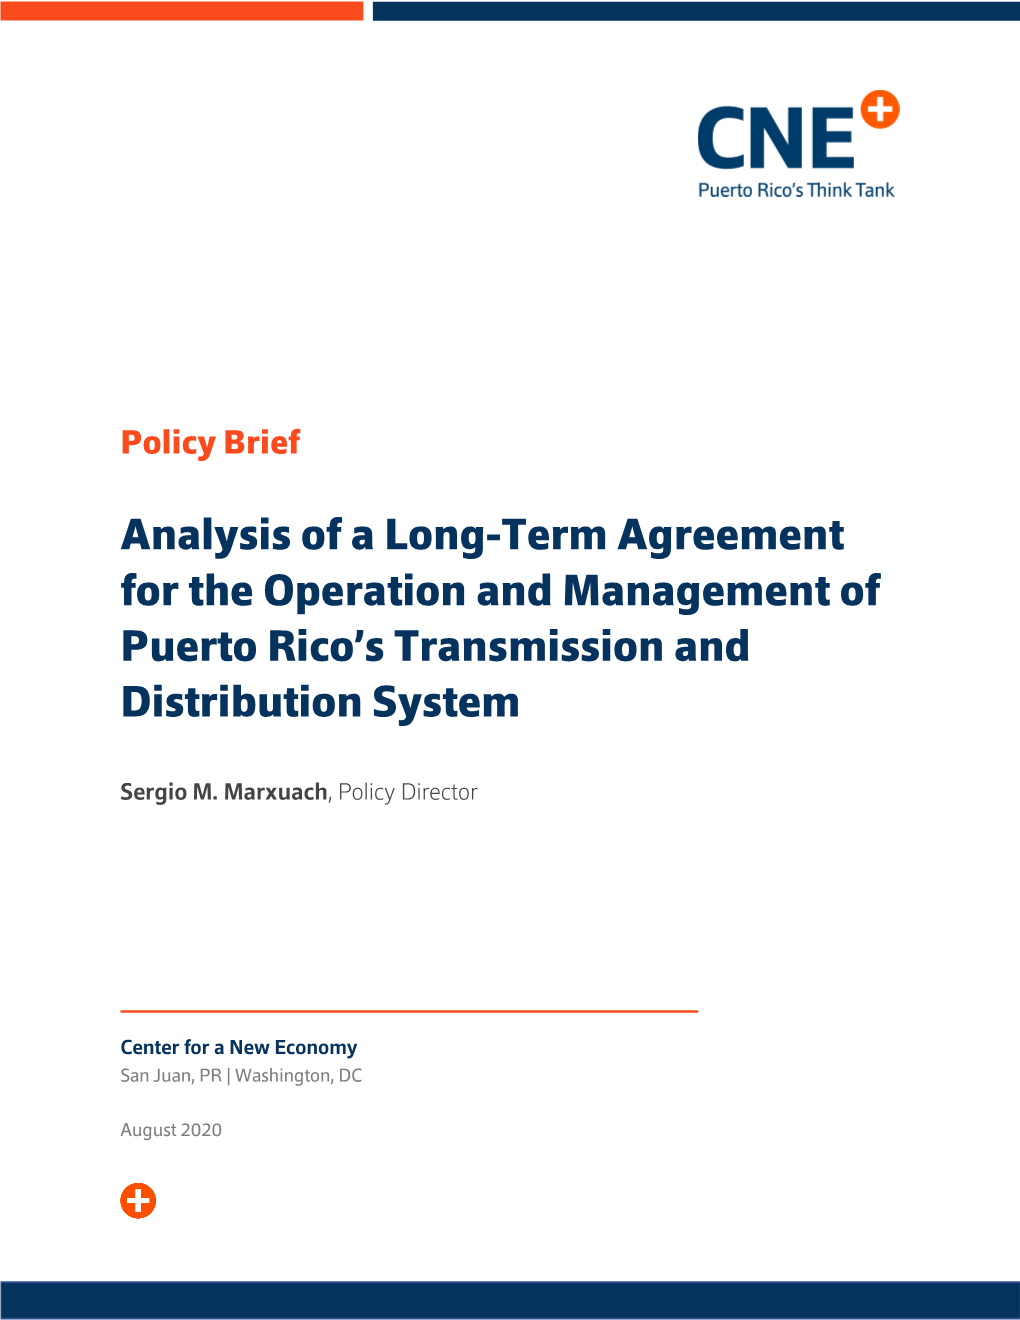 Analysis of a Long-Term Agreement for the Operation and Management of Puerto Rico’S Transmission And